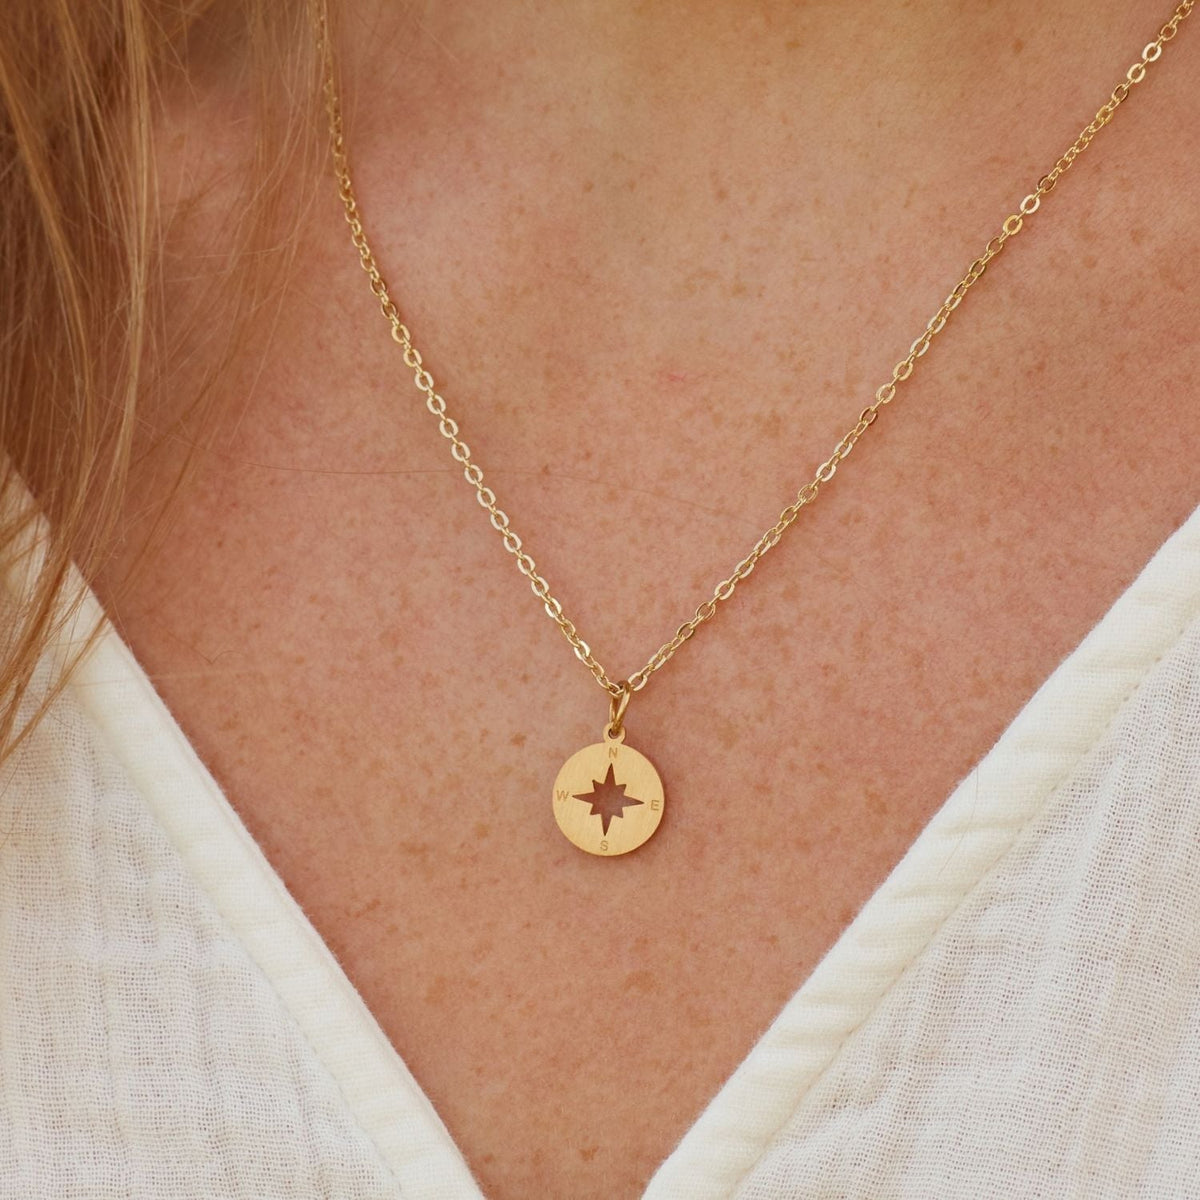 To My Sister in Law | Priceless Gift | Compass Necklace